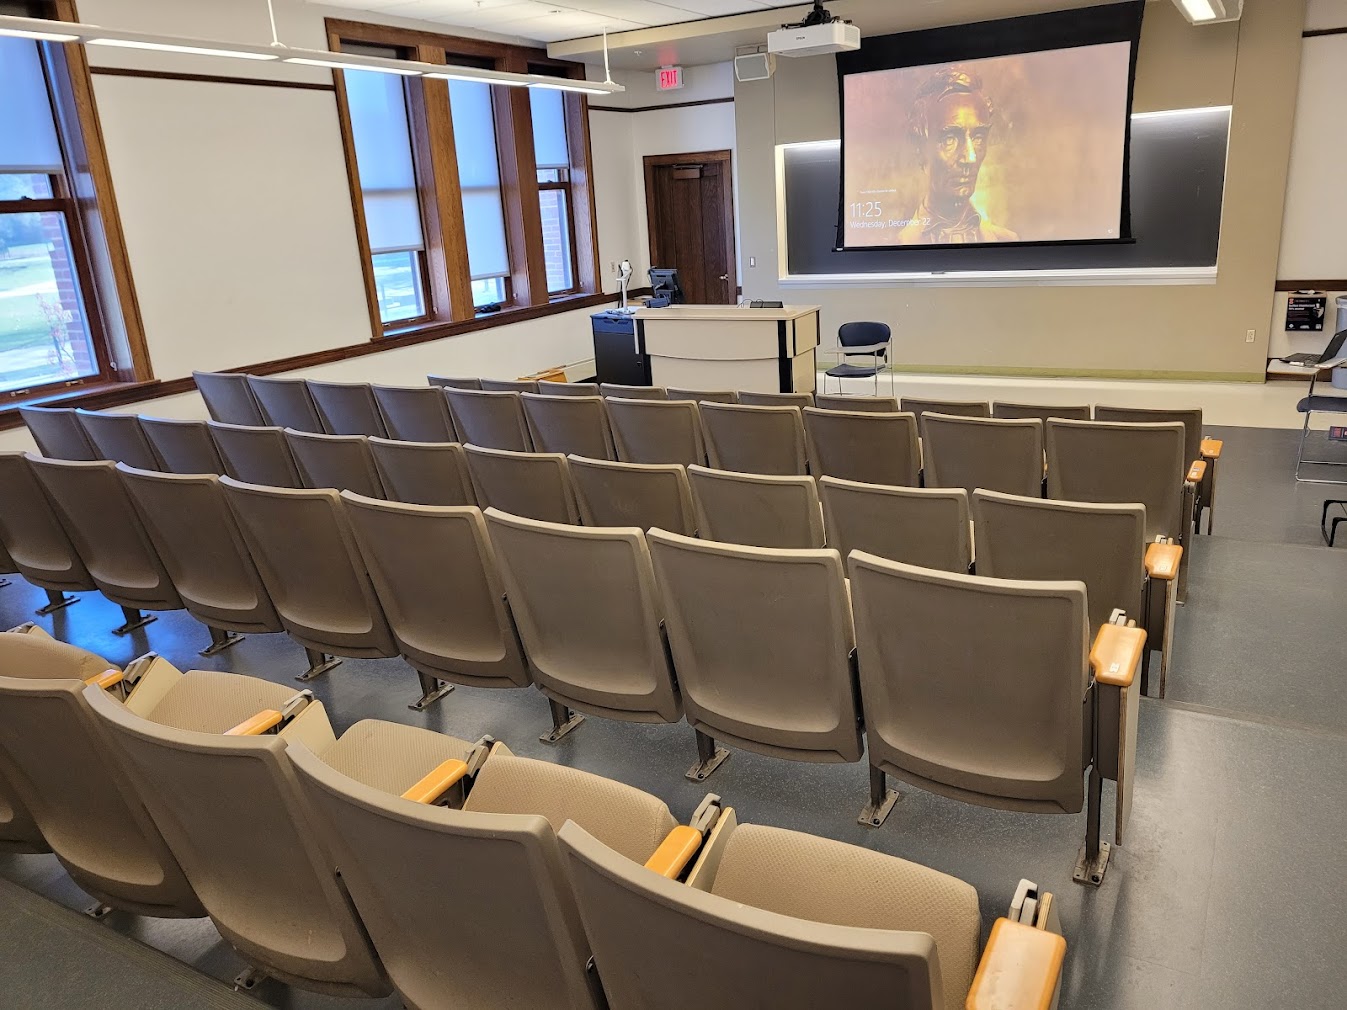 A view of the classroom with theatre auditorium seating, chalkboard, and instructor table in front.